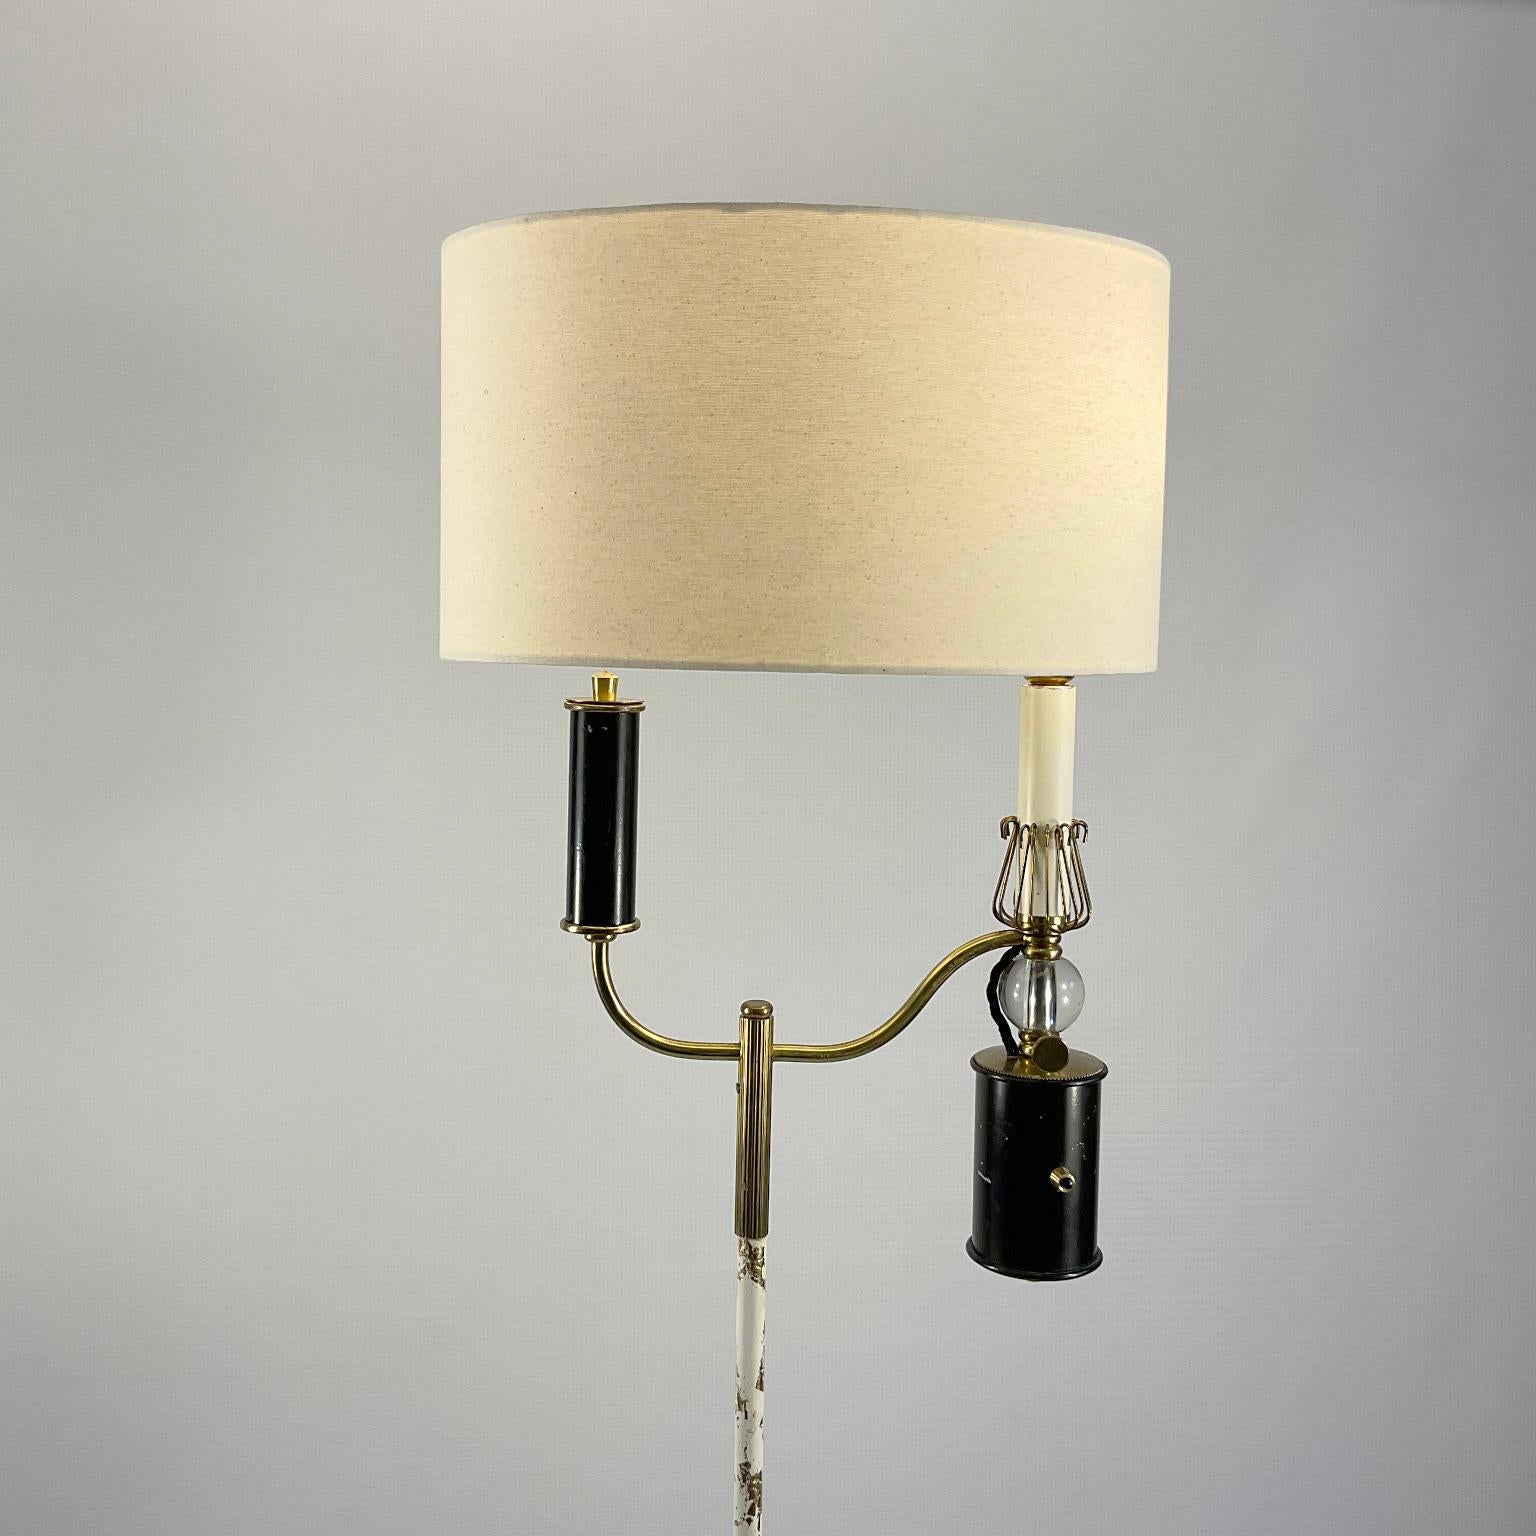 1950s Floor Lamp Attributed to Maison Lunel France For Sale 6